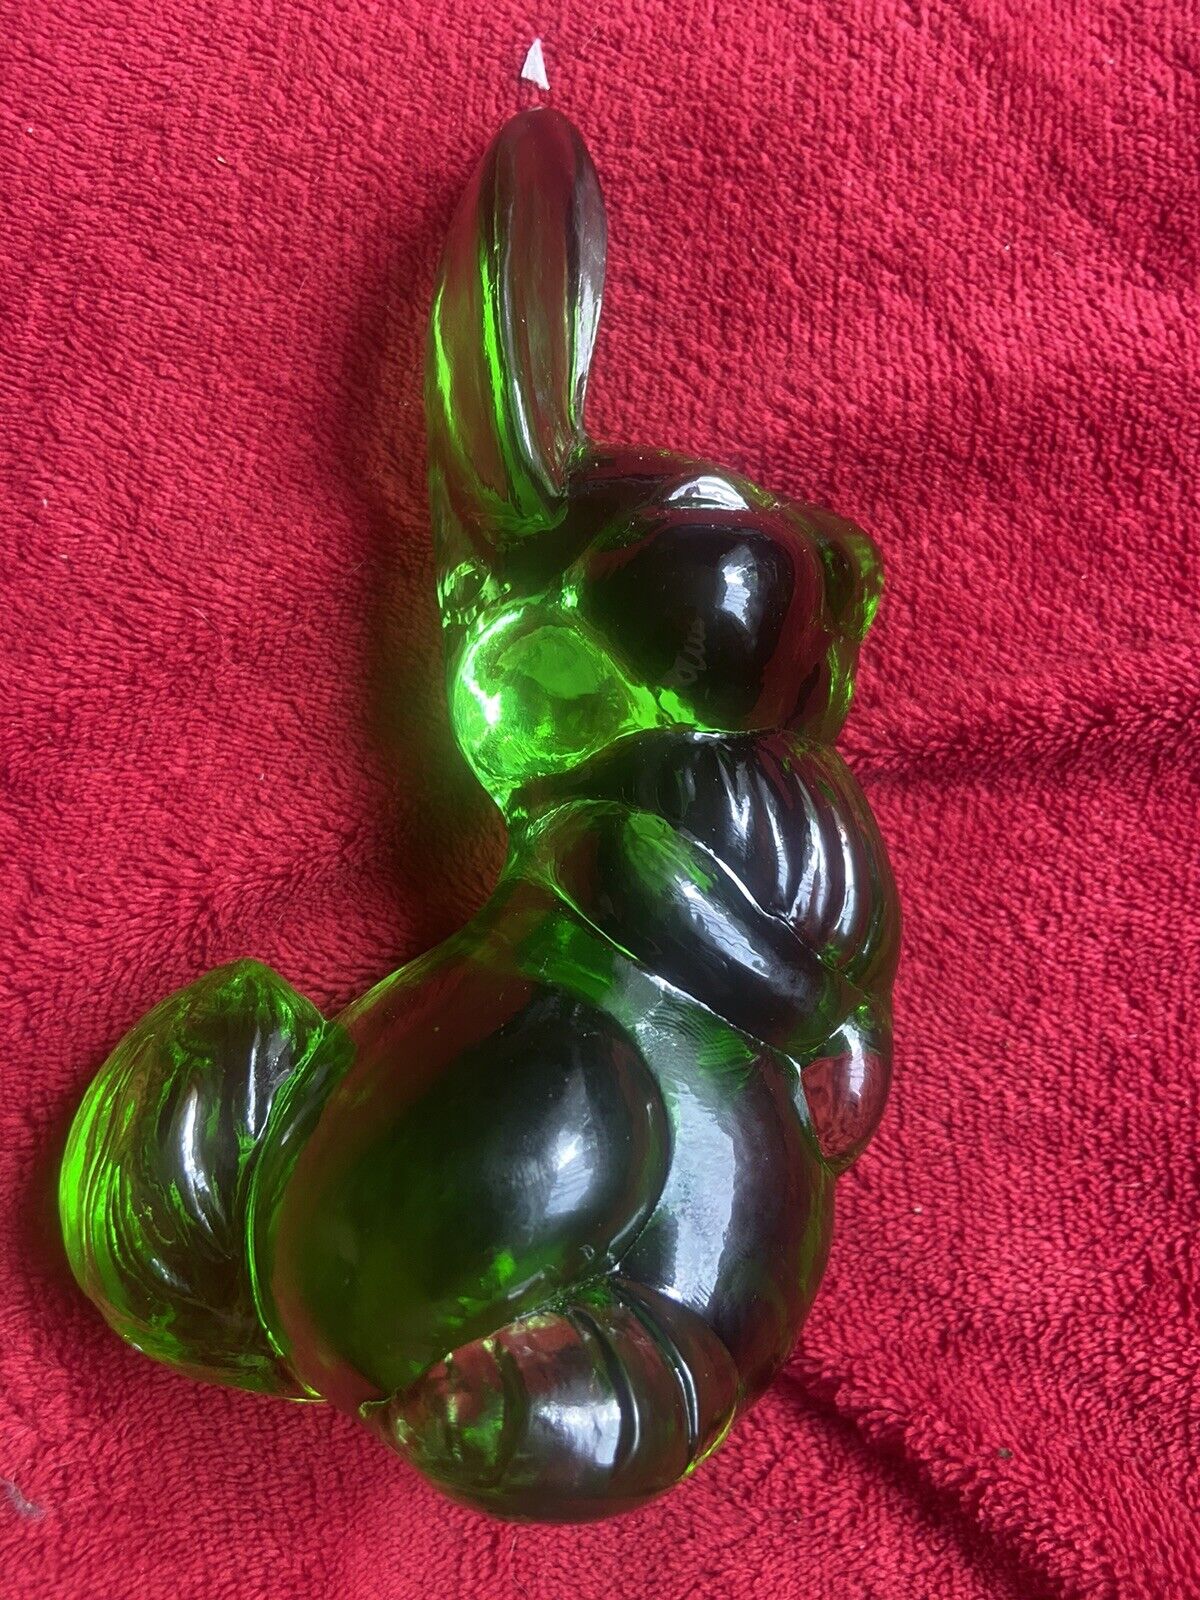 Burkam Bunny made by the Mosser Viking mold.  Green Rabbit Thumper Vintage